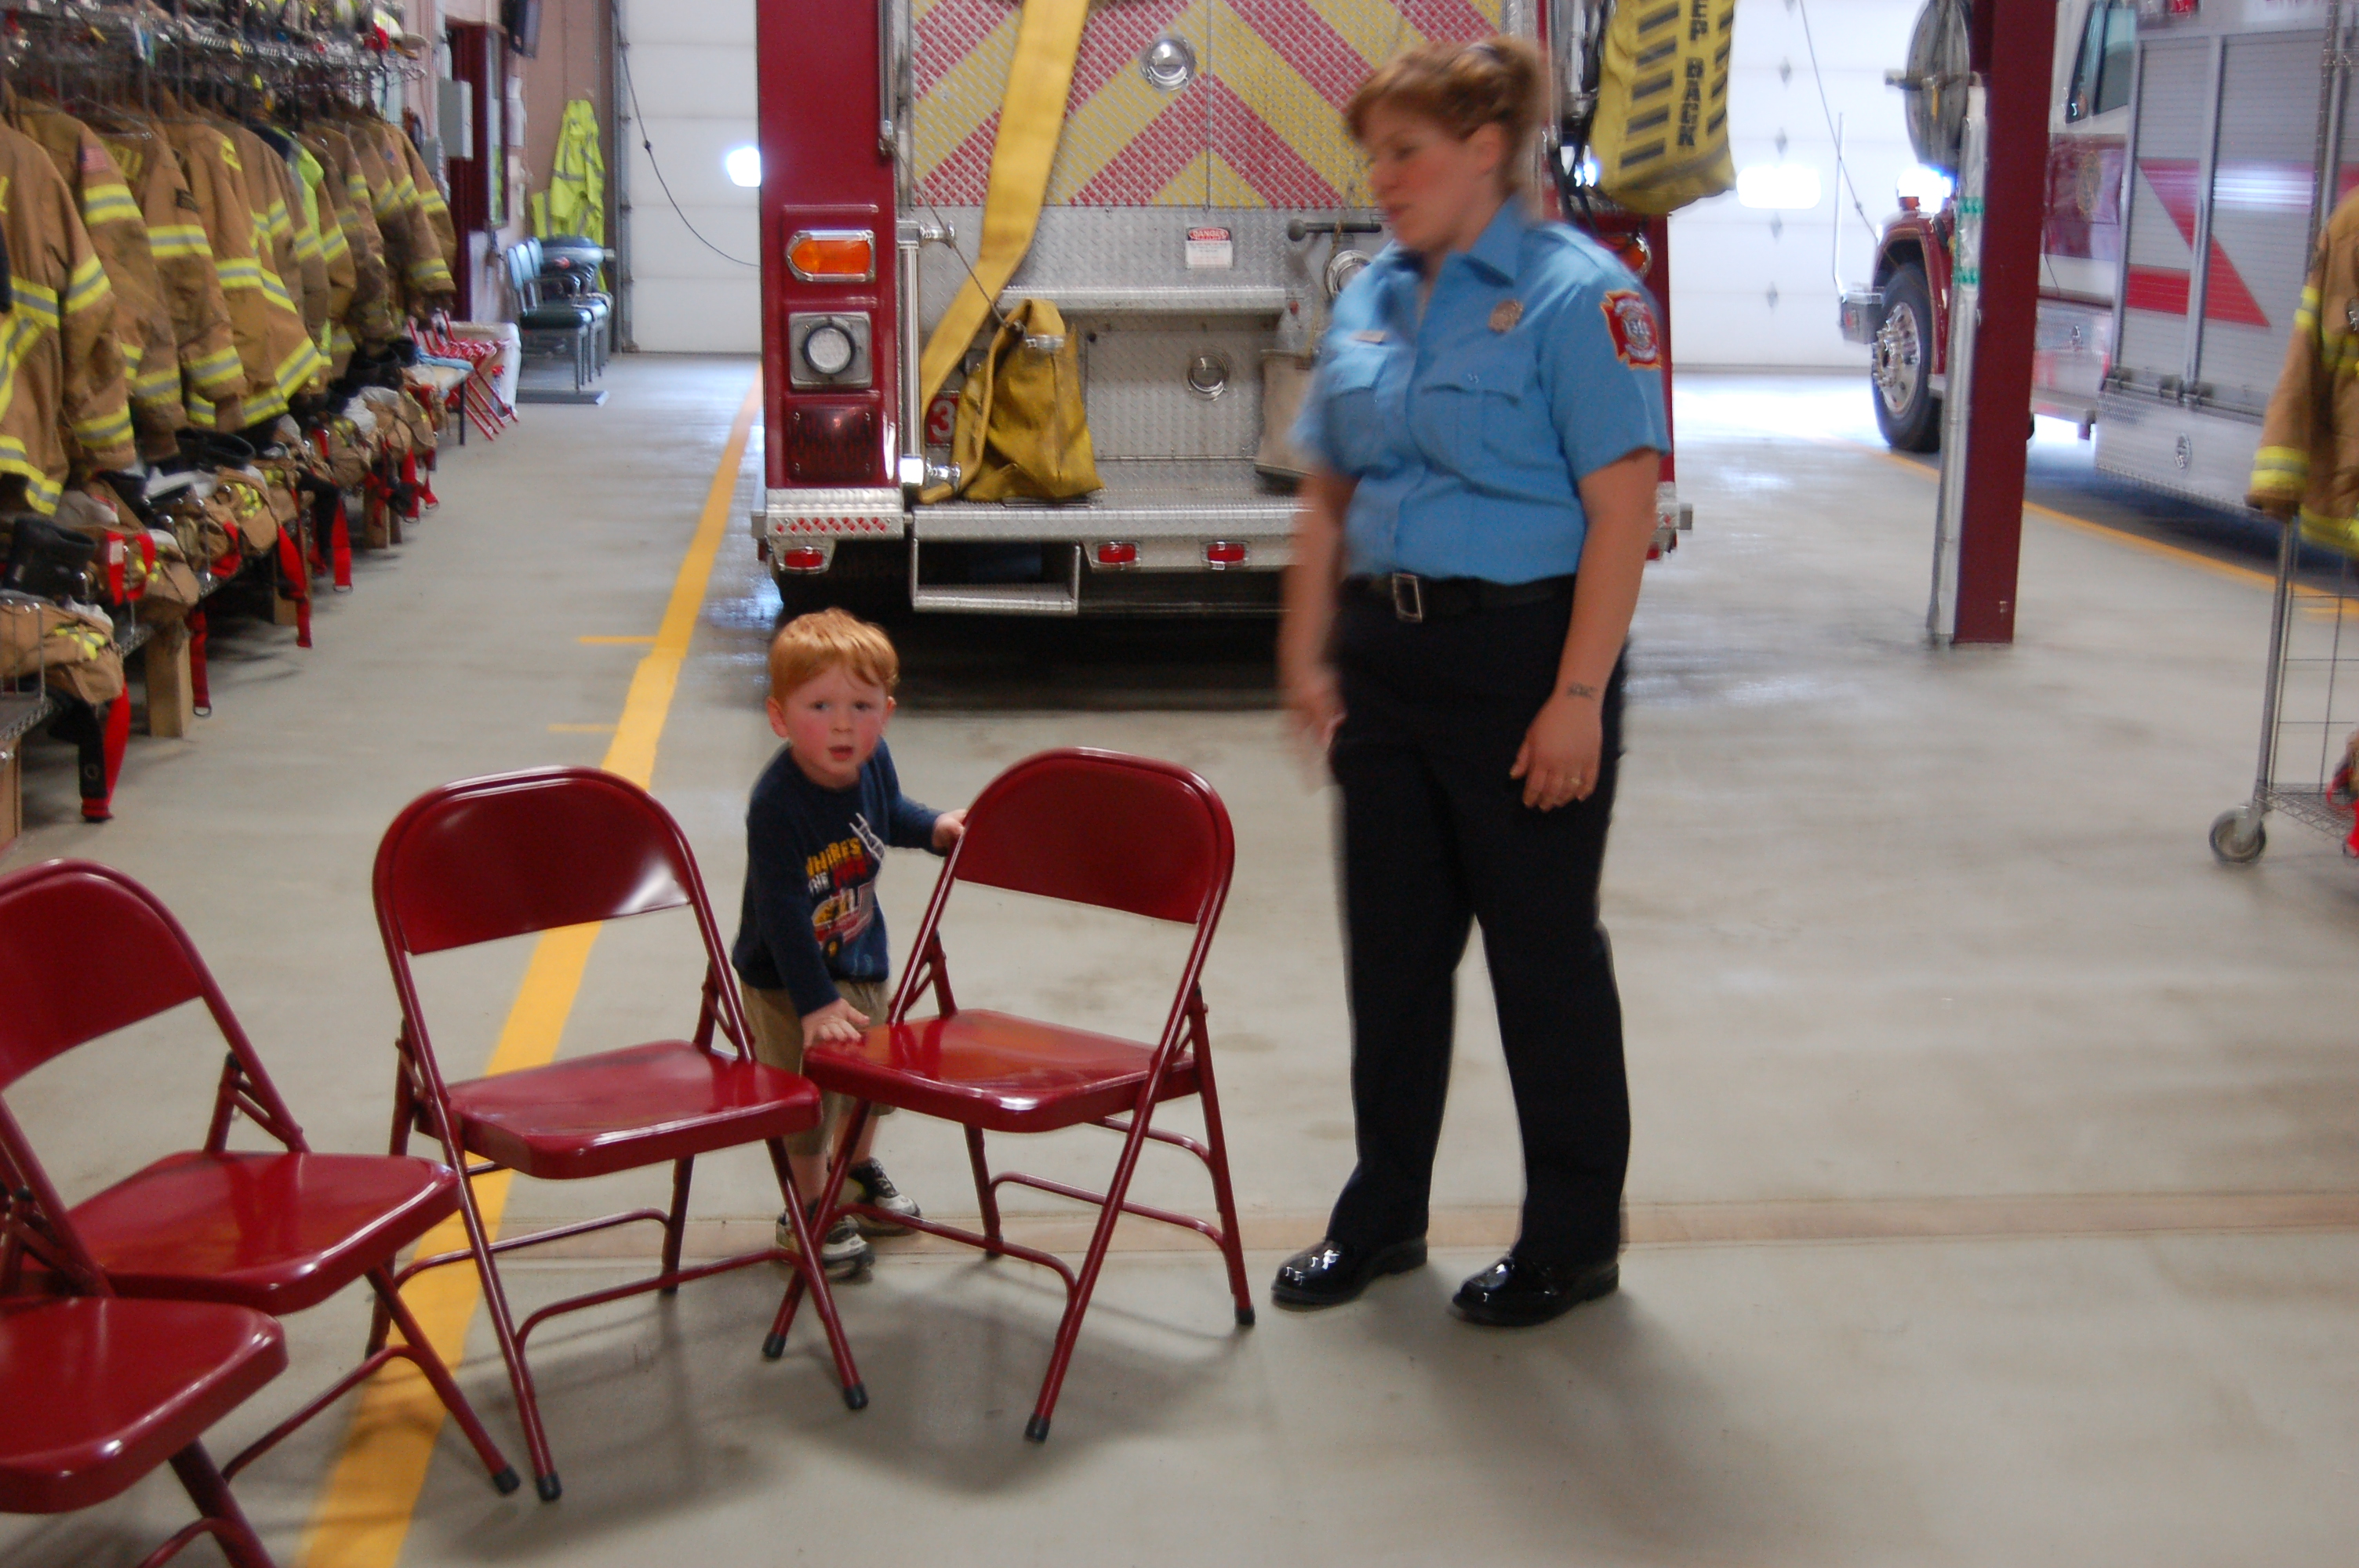 04-21-12  Other - Recruitment Open House